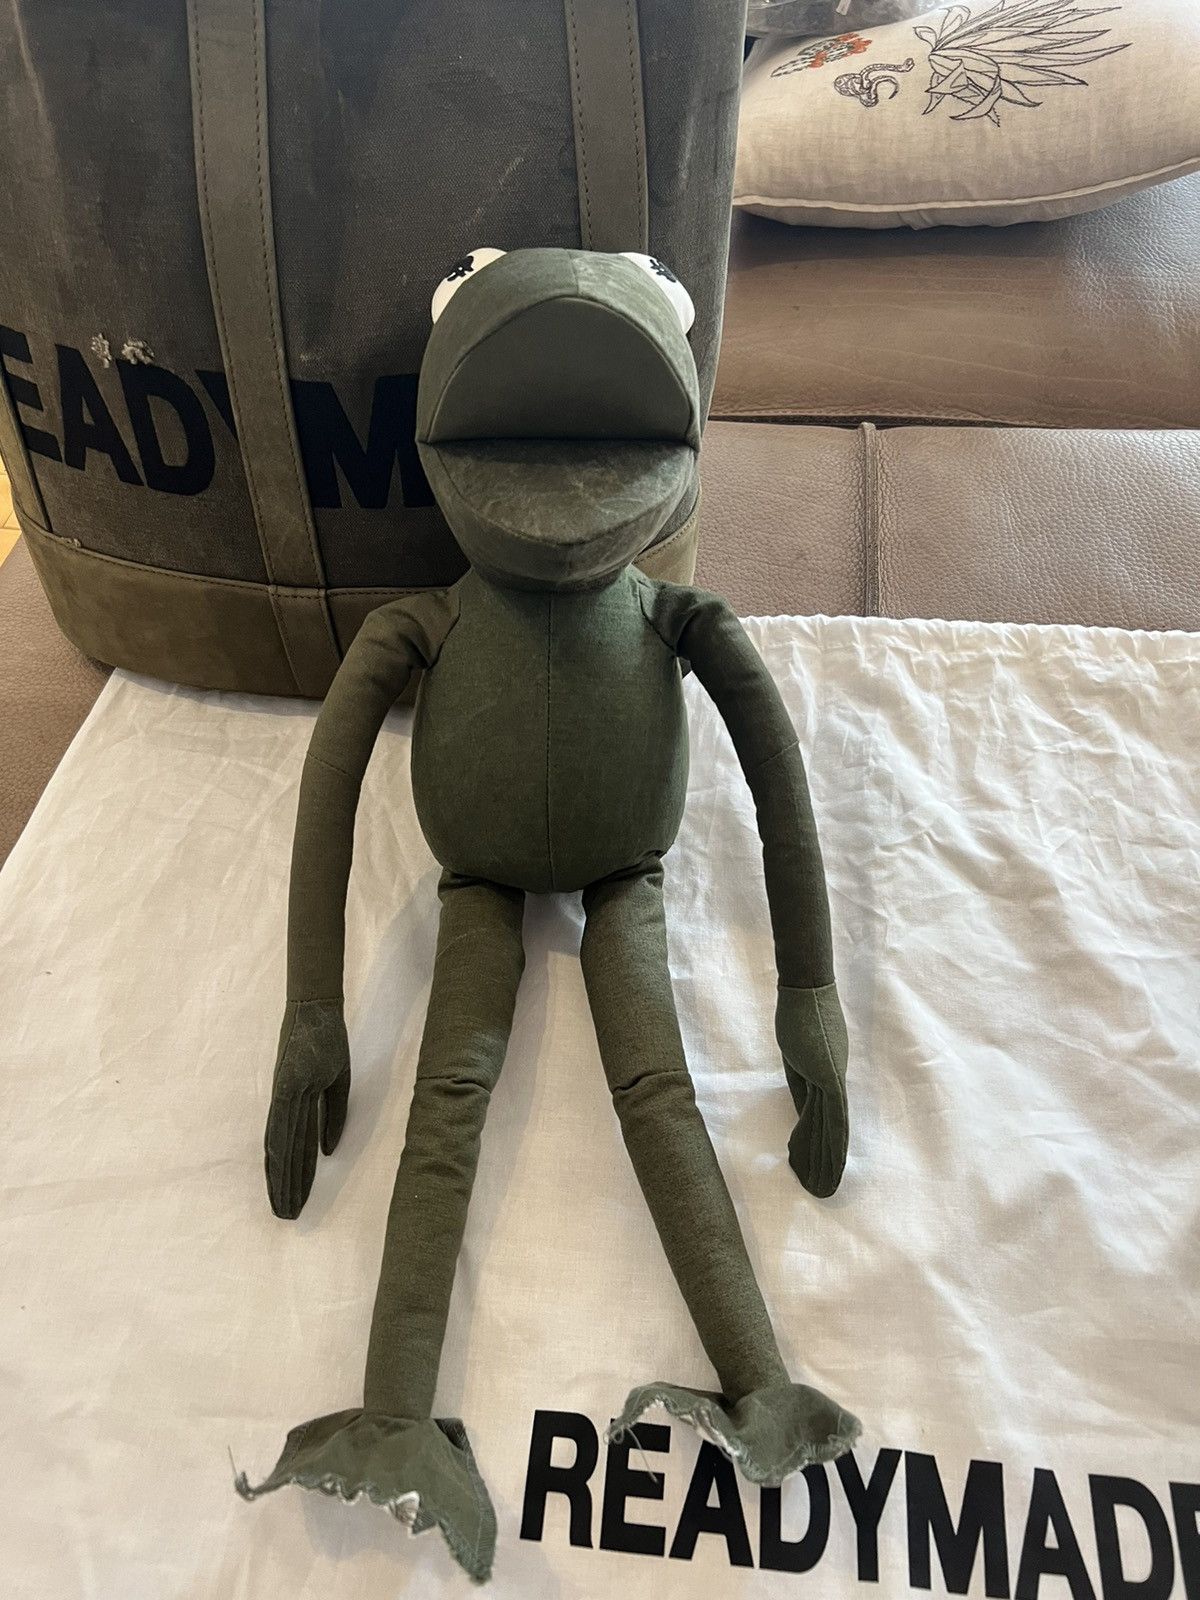 READYMADE Readymade Patchwork Frogman | Grailed